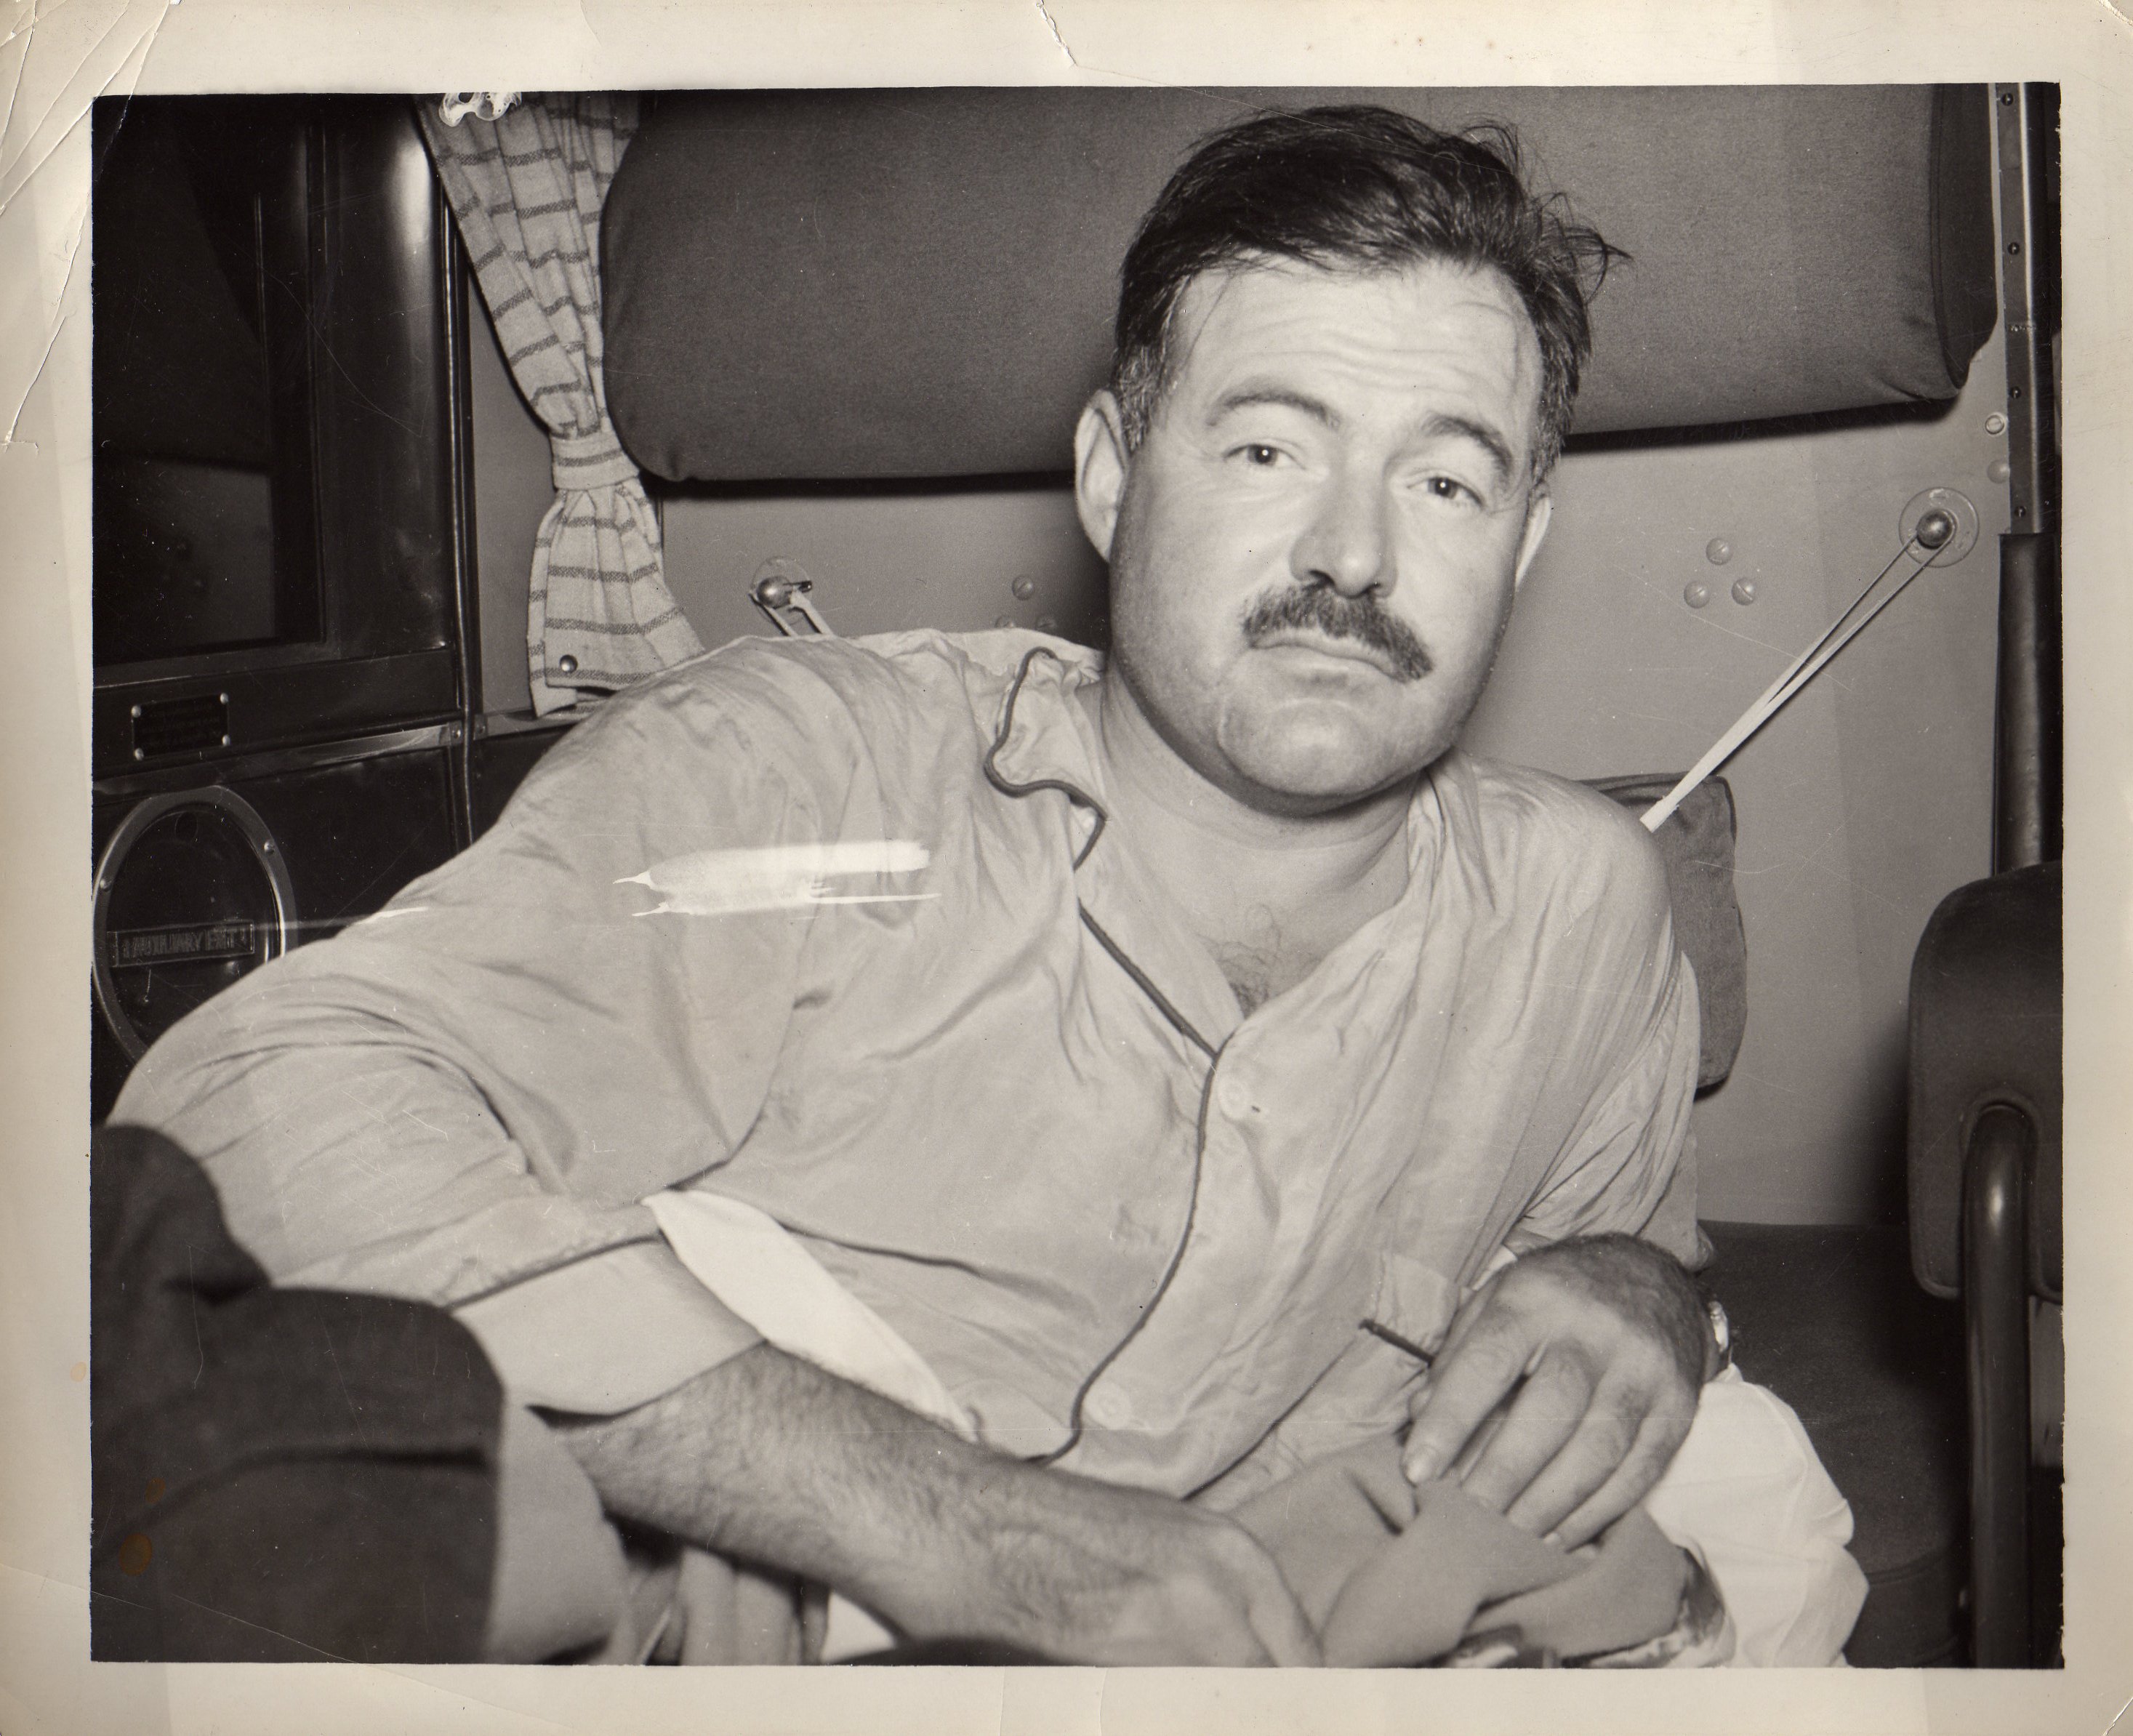 A black and white picture of Hemingway in his pajamas, just awakened, in his compartment on a sleeper plane.  He is shown from the chest up, semi-reclining, leaning on an elbow, holding the blanket in his hands.  His eyebrows are slightly raised, and he has a bit of a dazed expression.